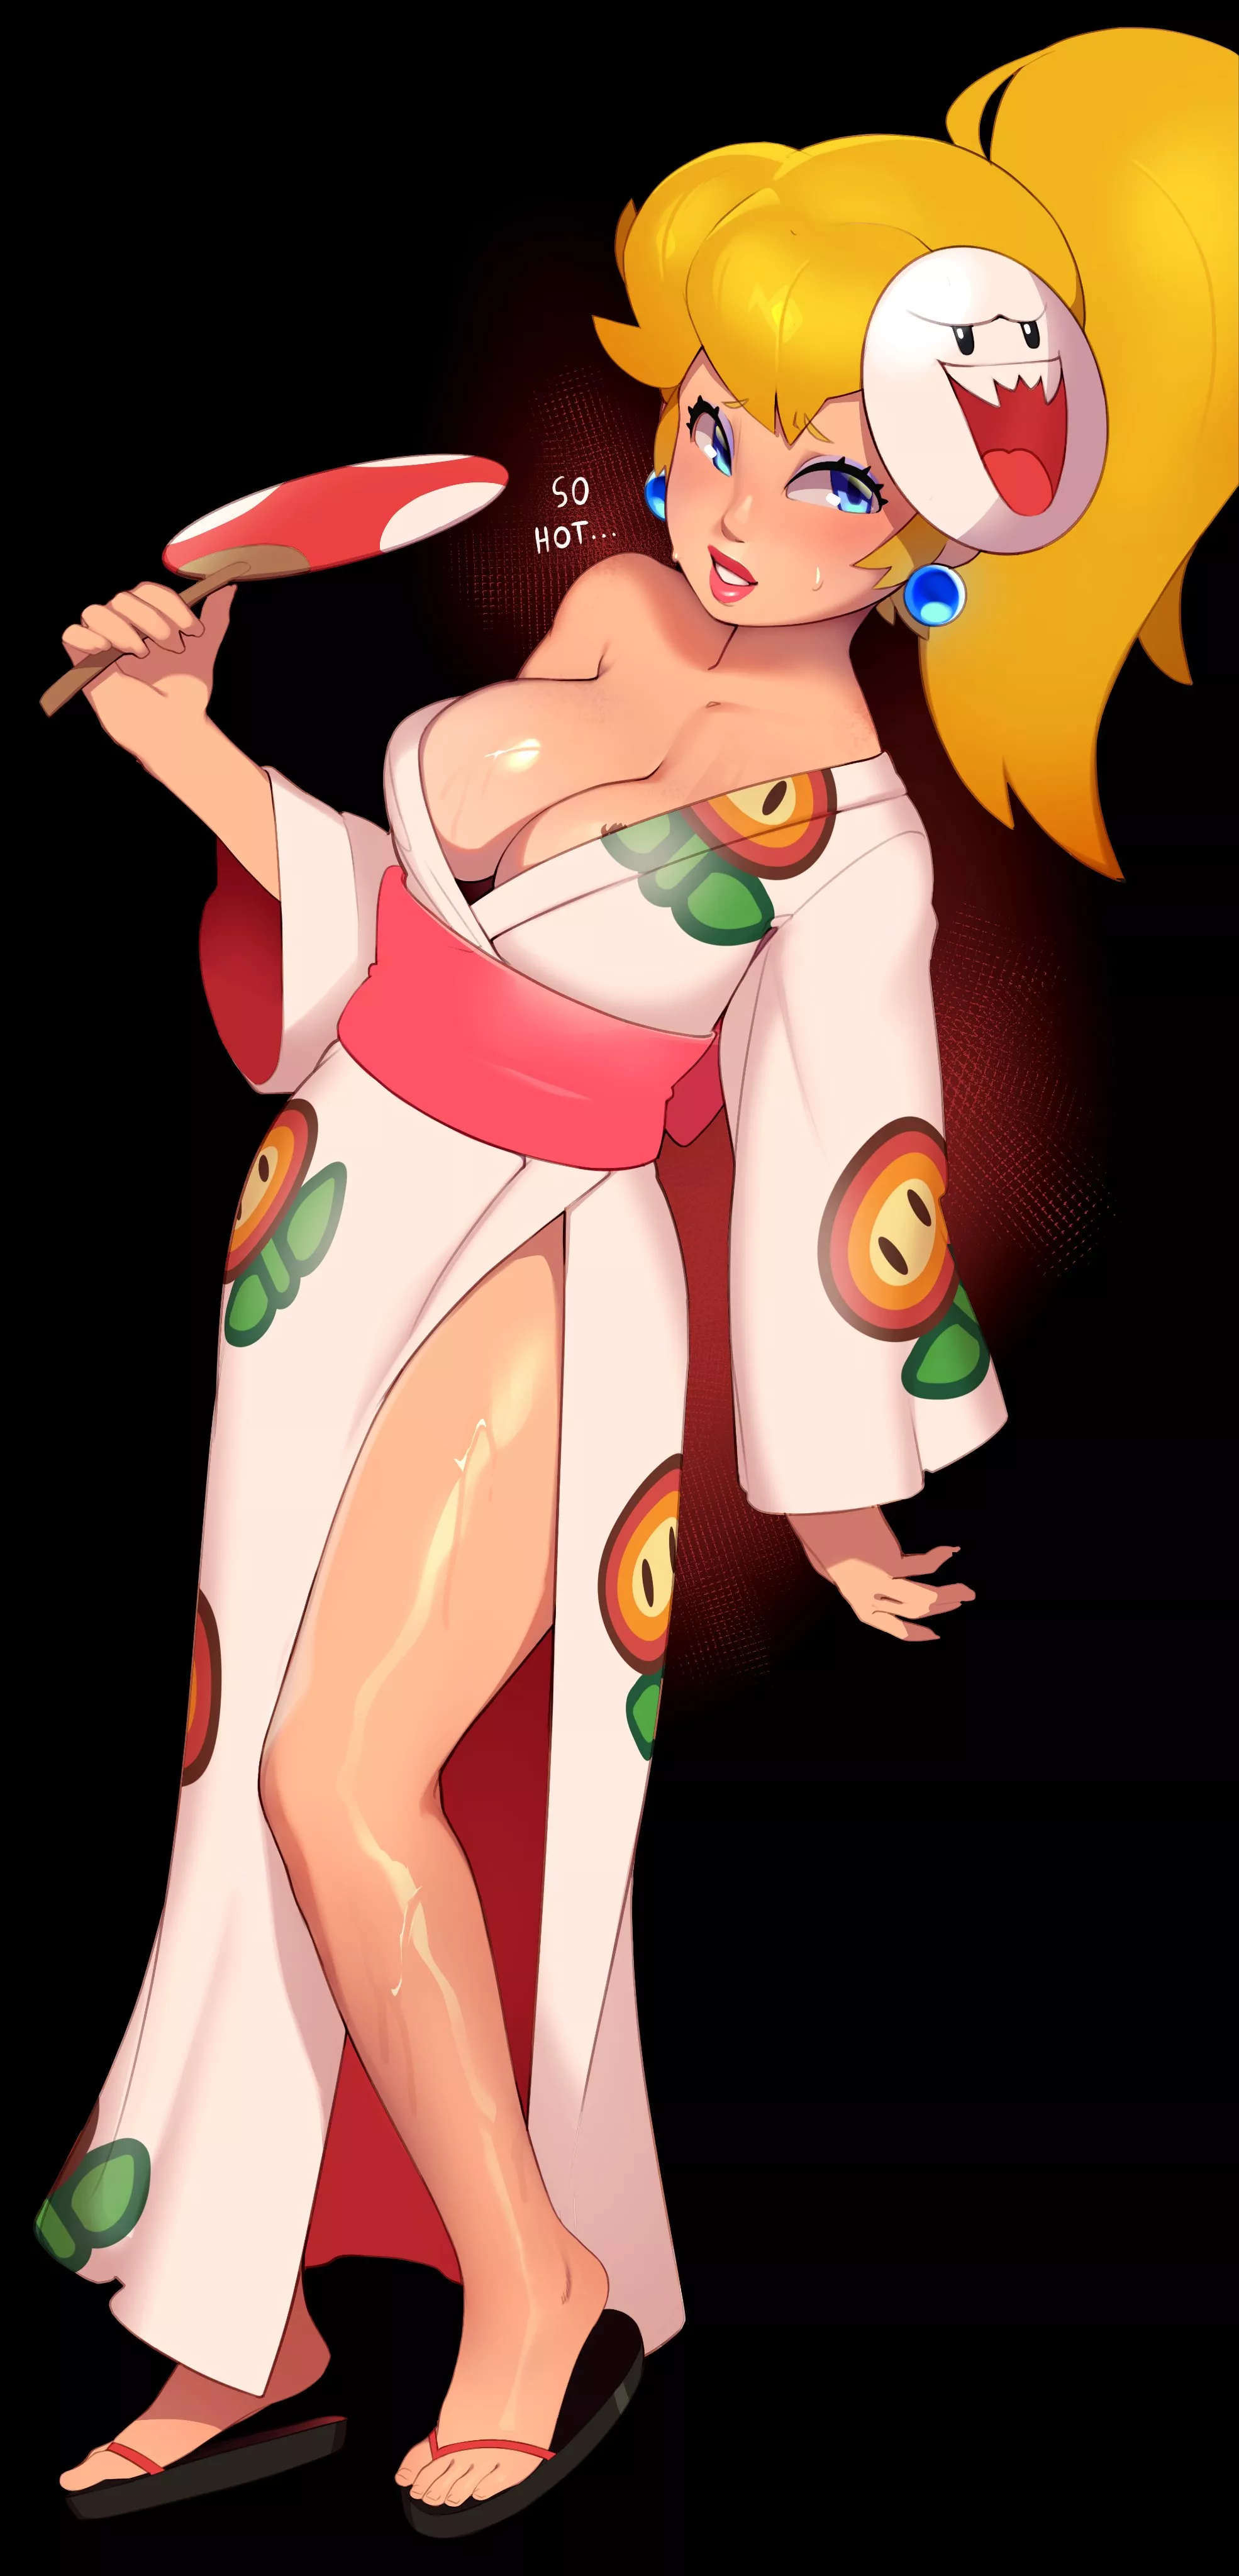 Peach S Hot Trip To Browser S Kingdom By Combos Doodles Nudes